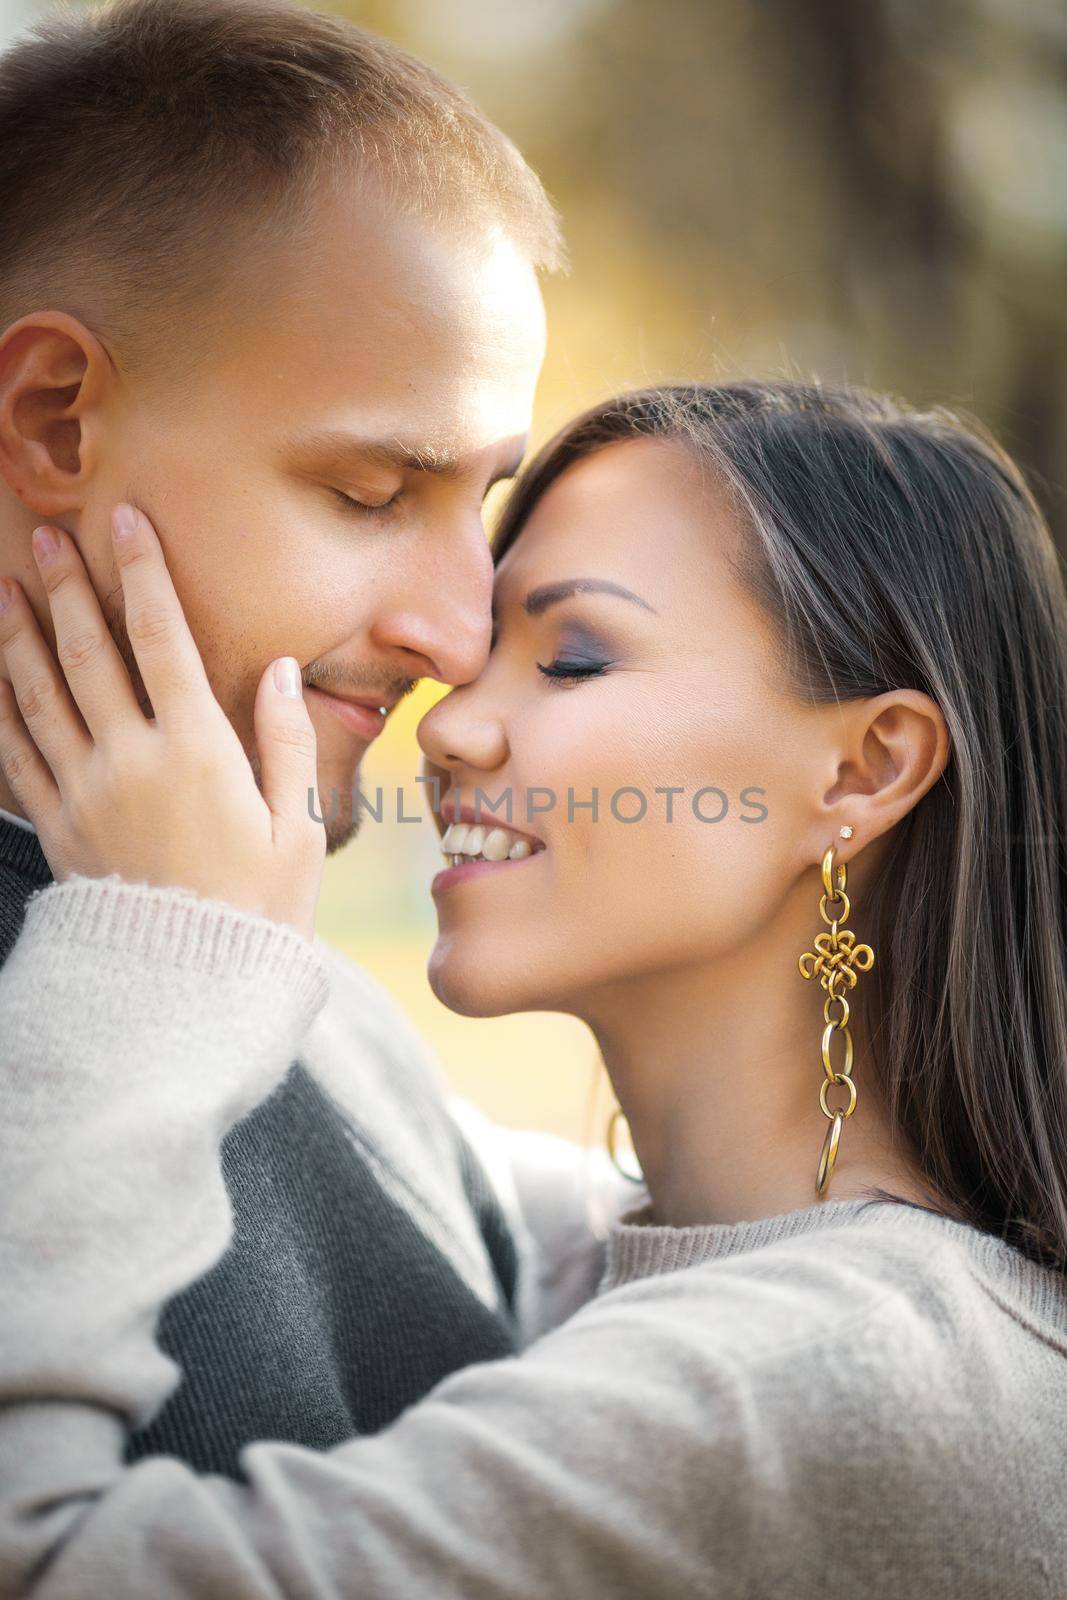 Cute romantic young couple hugging tenderly in autumn nature.